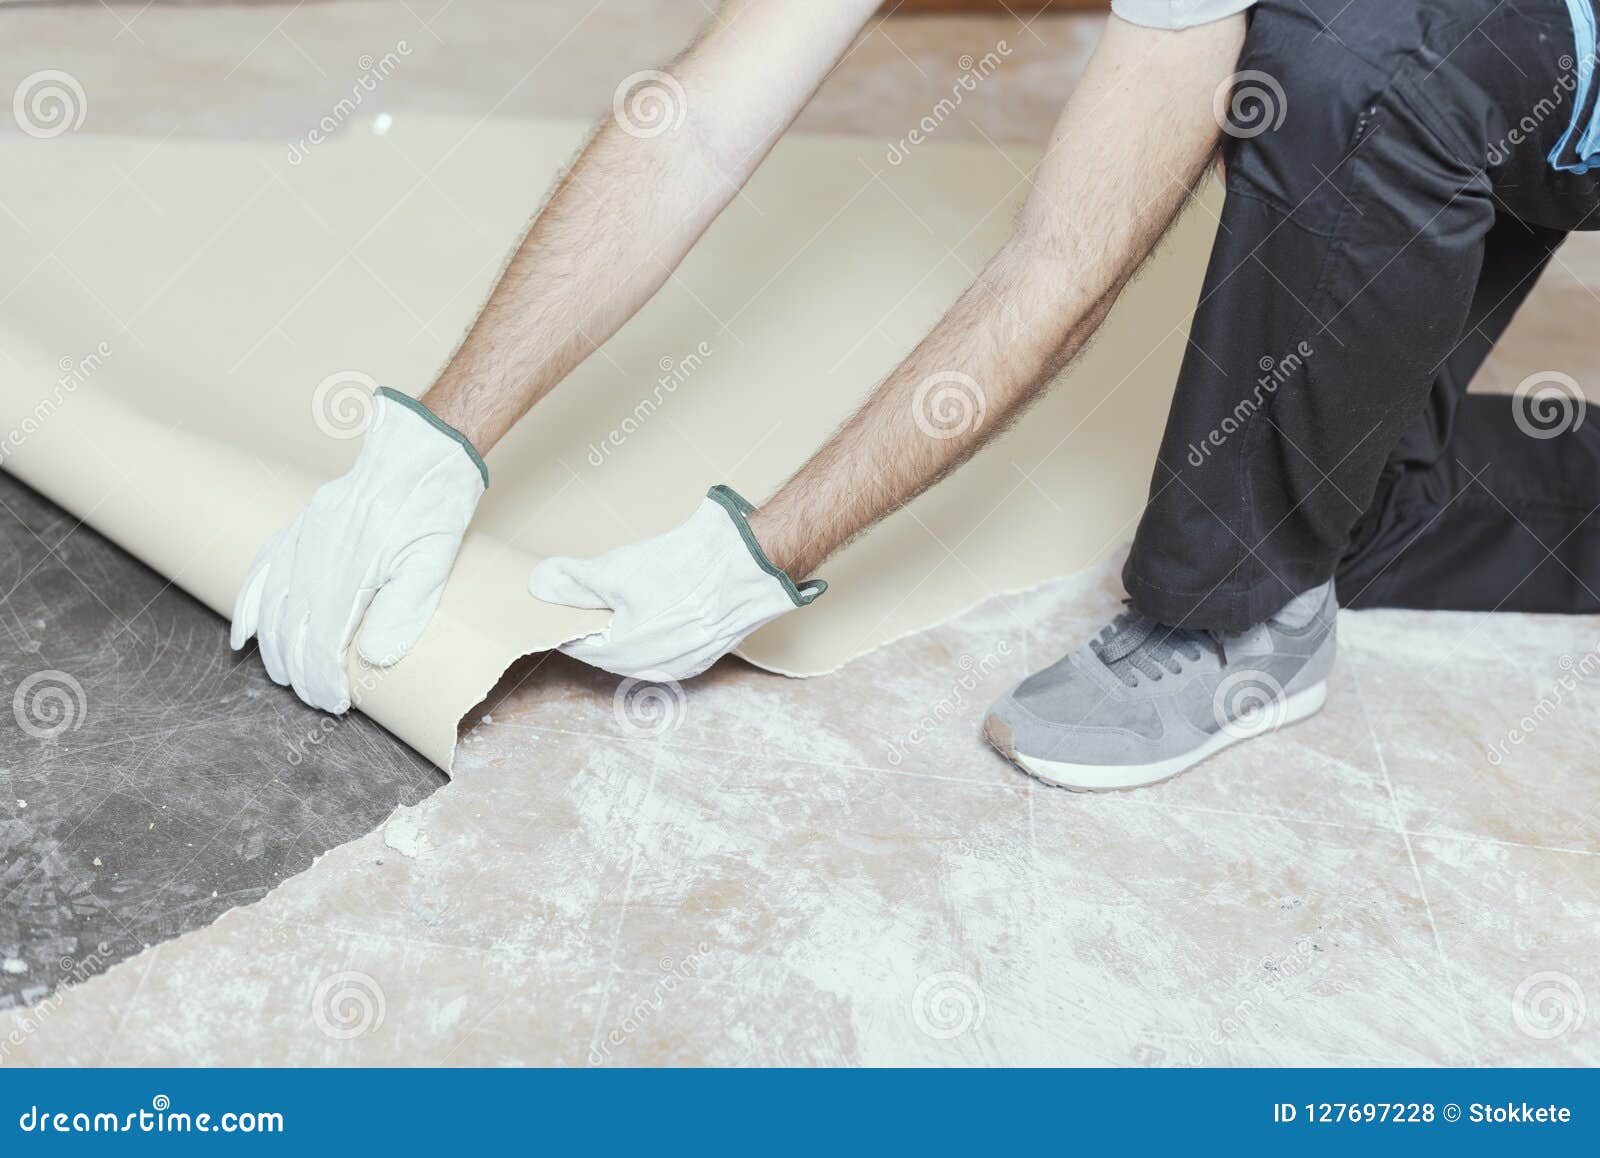 Contractor Removing An Old Linoleum Flooring Stock Photo Image